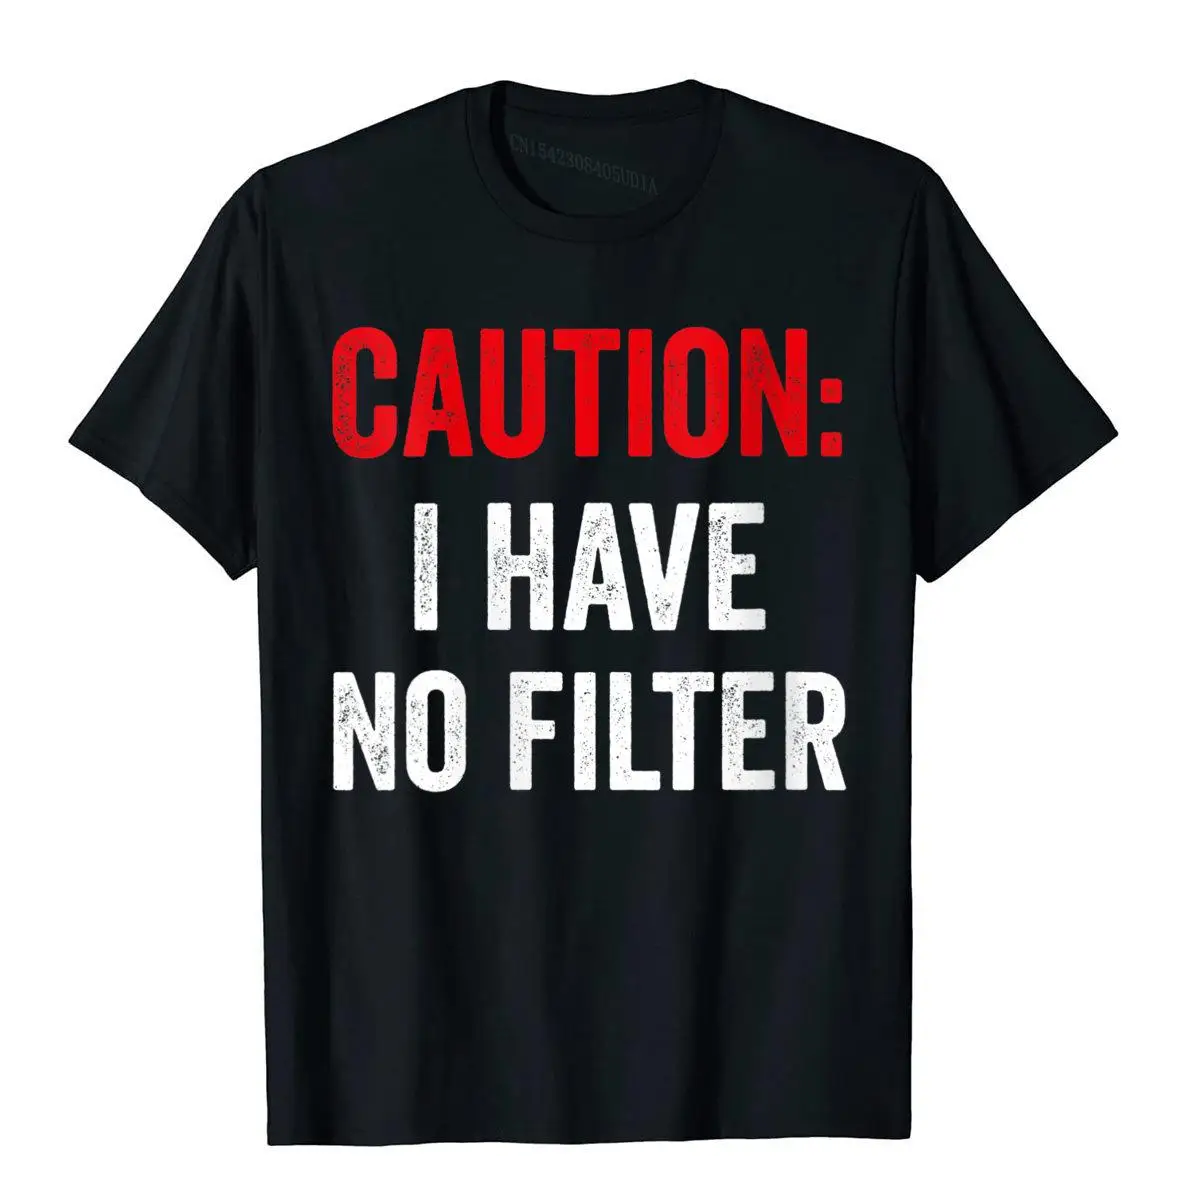 

Womens Caution I Have No Filter Funny Sarcasm Crewneck T-Shirt Cotton Street Tops Shirts Dominant Men Top T-Shirts Preppy Style